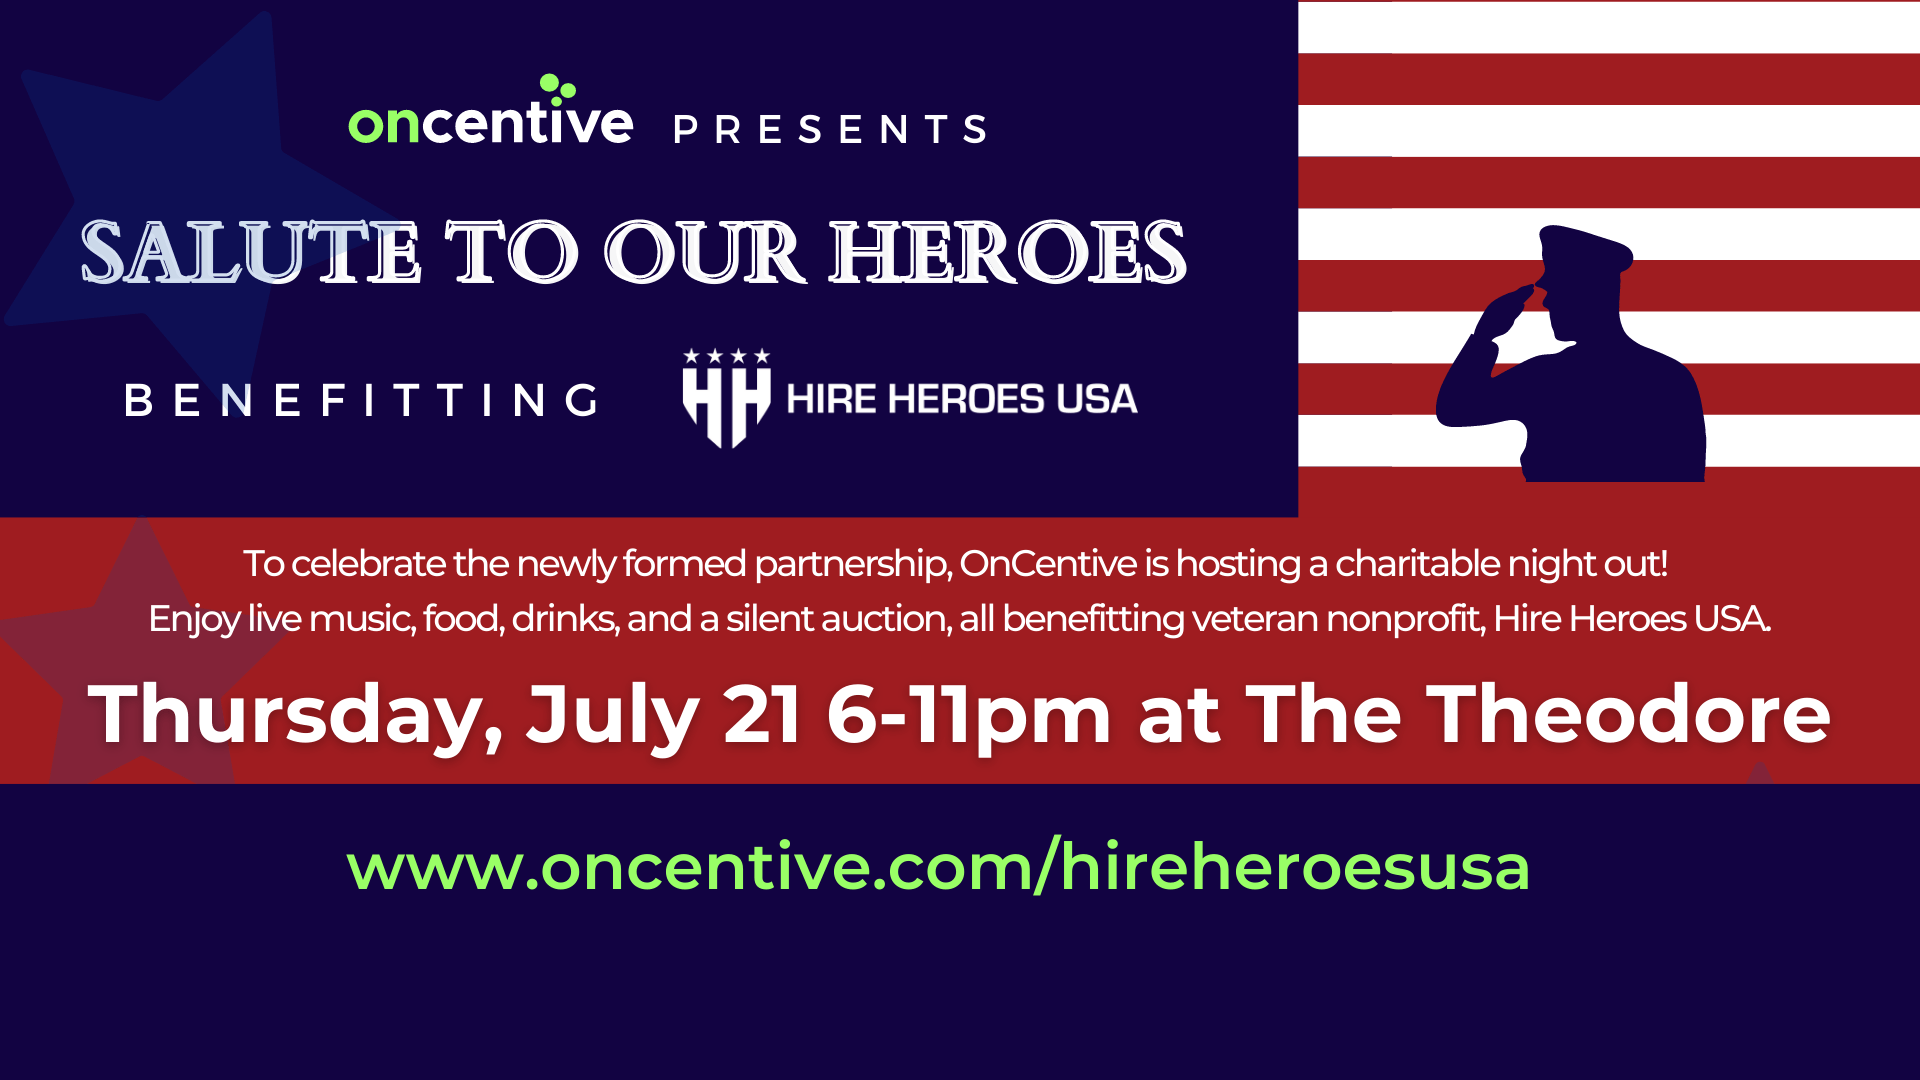 Join us for Salute To Our Heroes on July 21